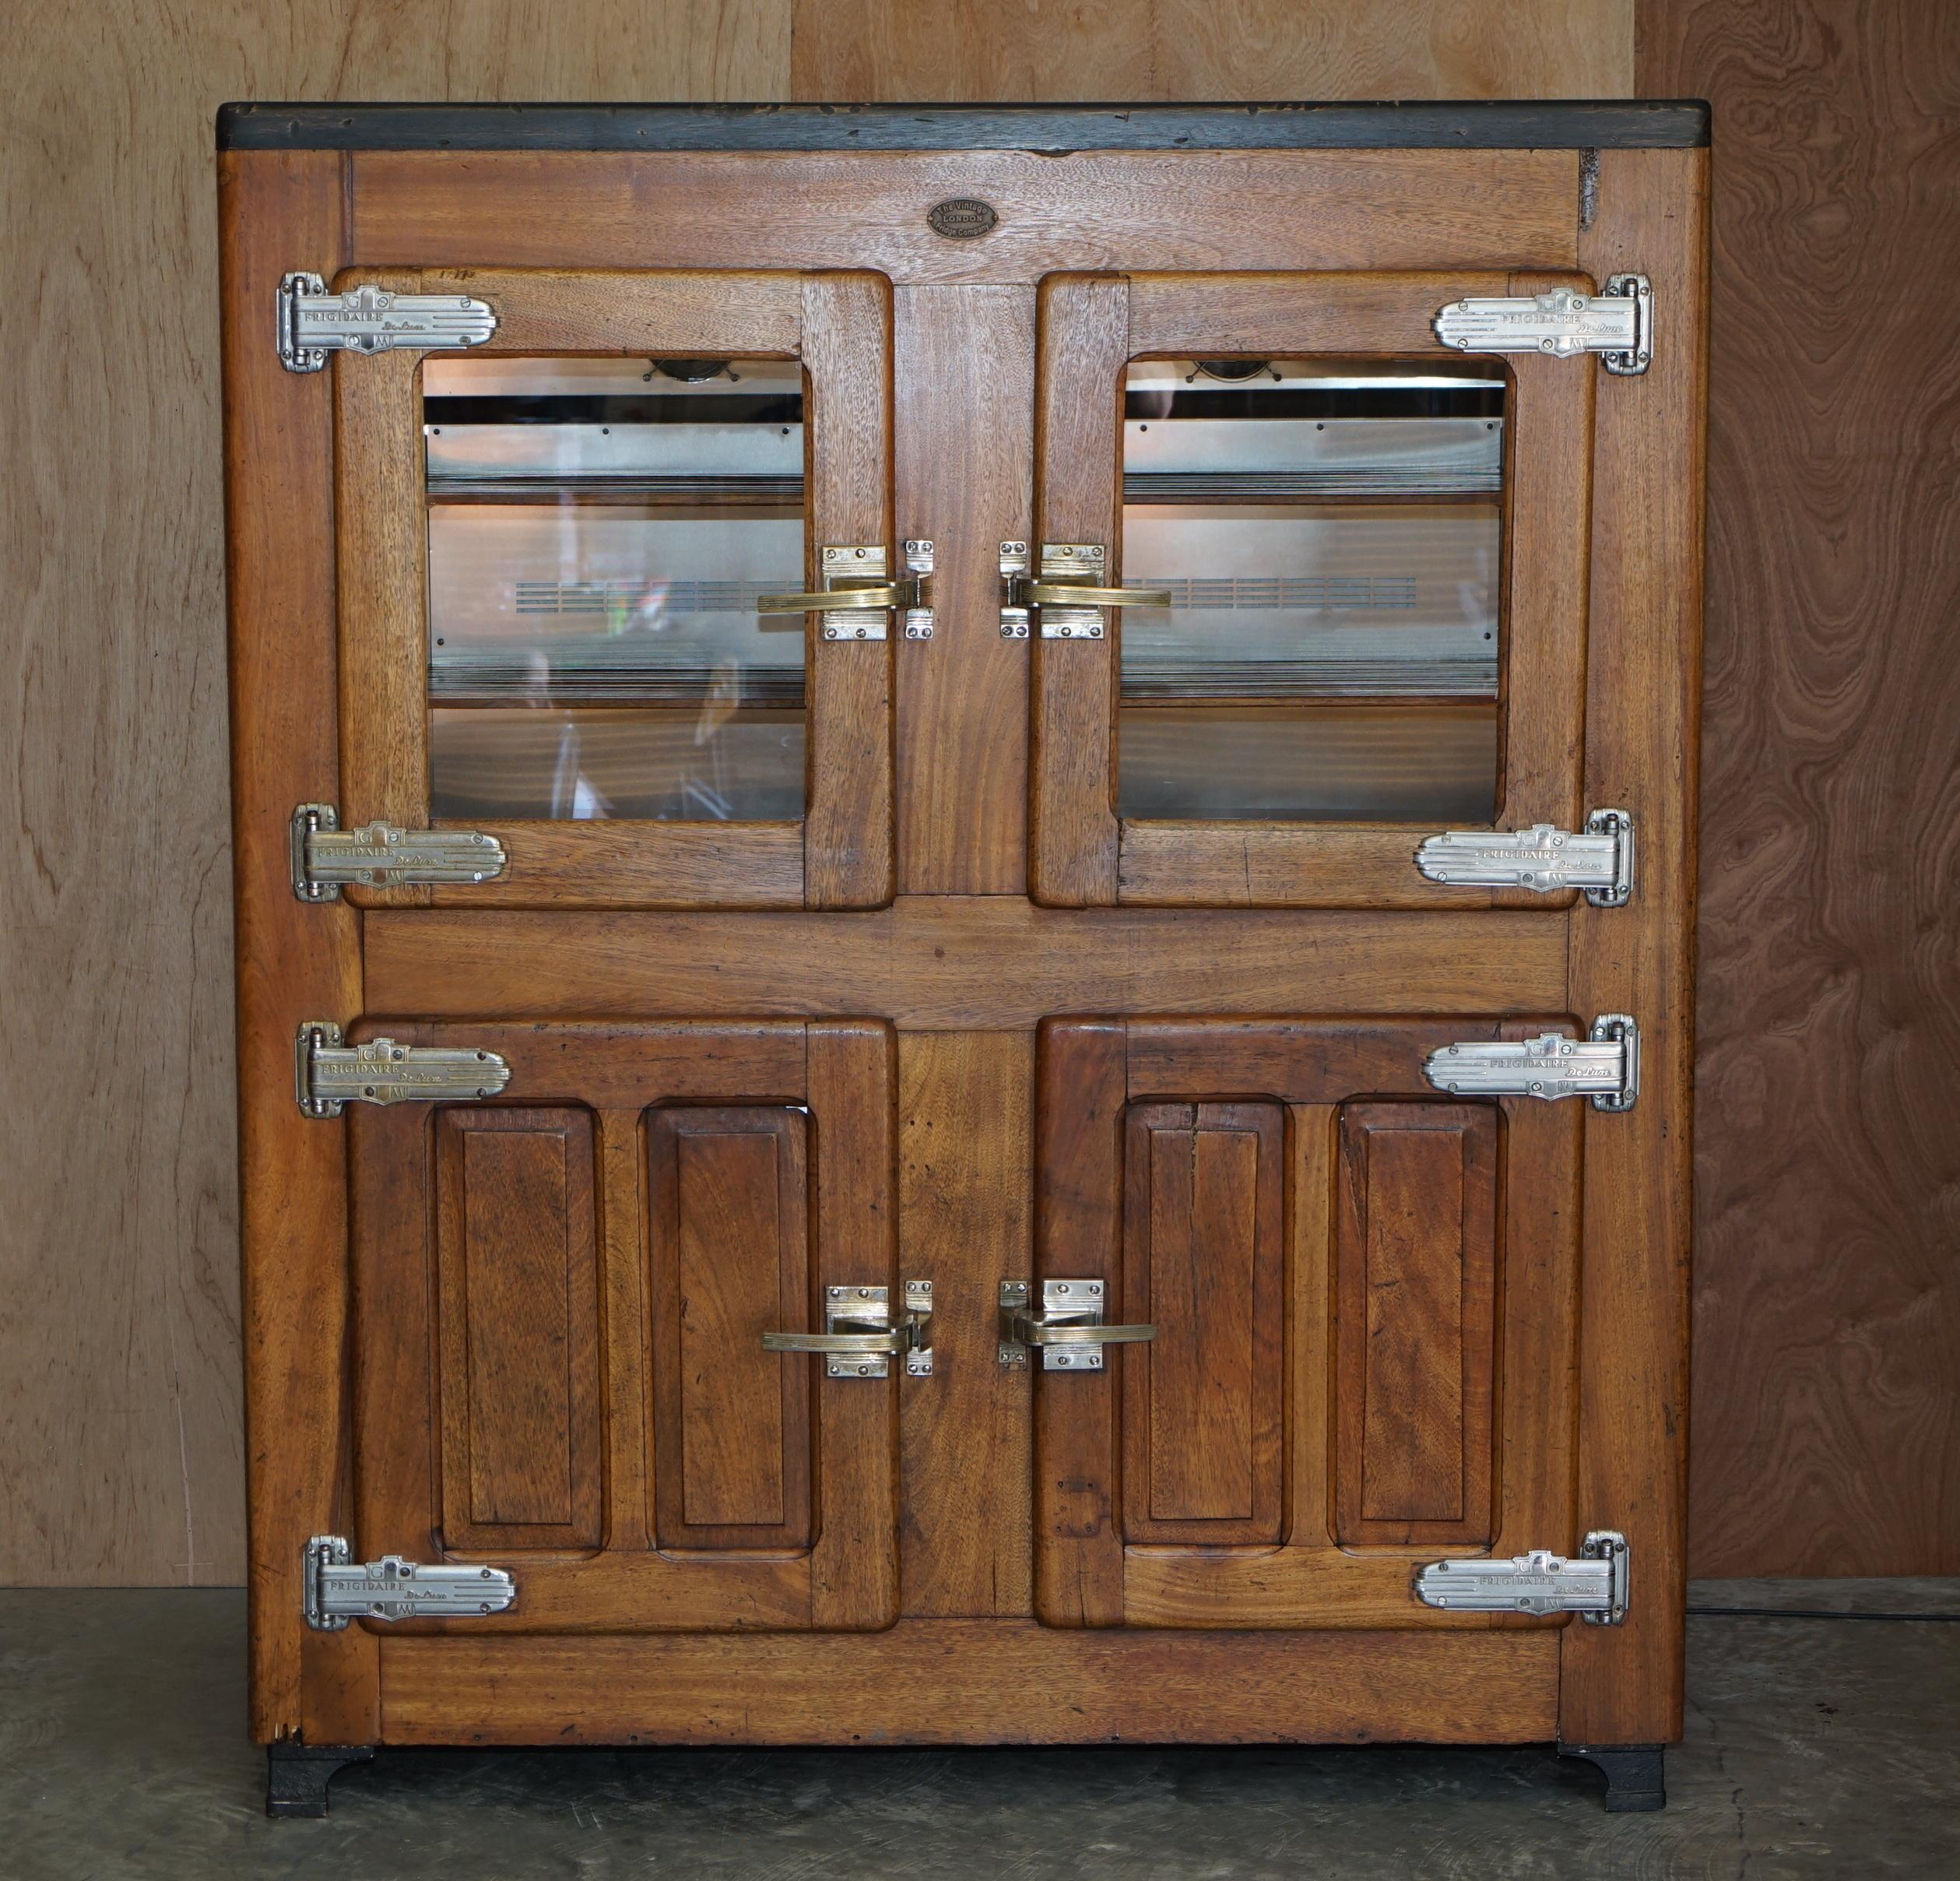 We are delighted to offer this very rare circa 1900 fully restored Argentinian oak antique fridge of very large scale

This piece is exceptional, it is a large impressive thing that captures absolutely everyone’s attention no matter where it is. I